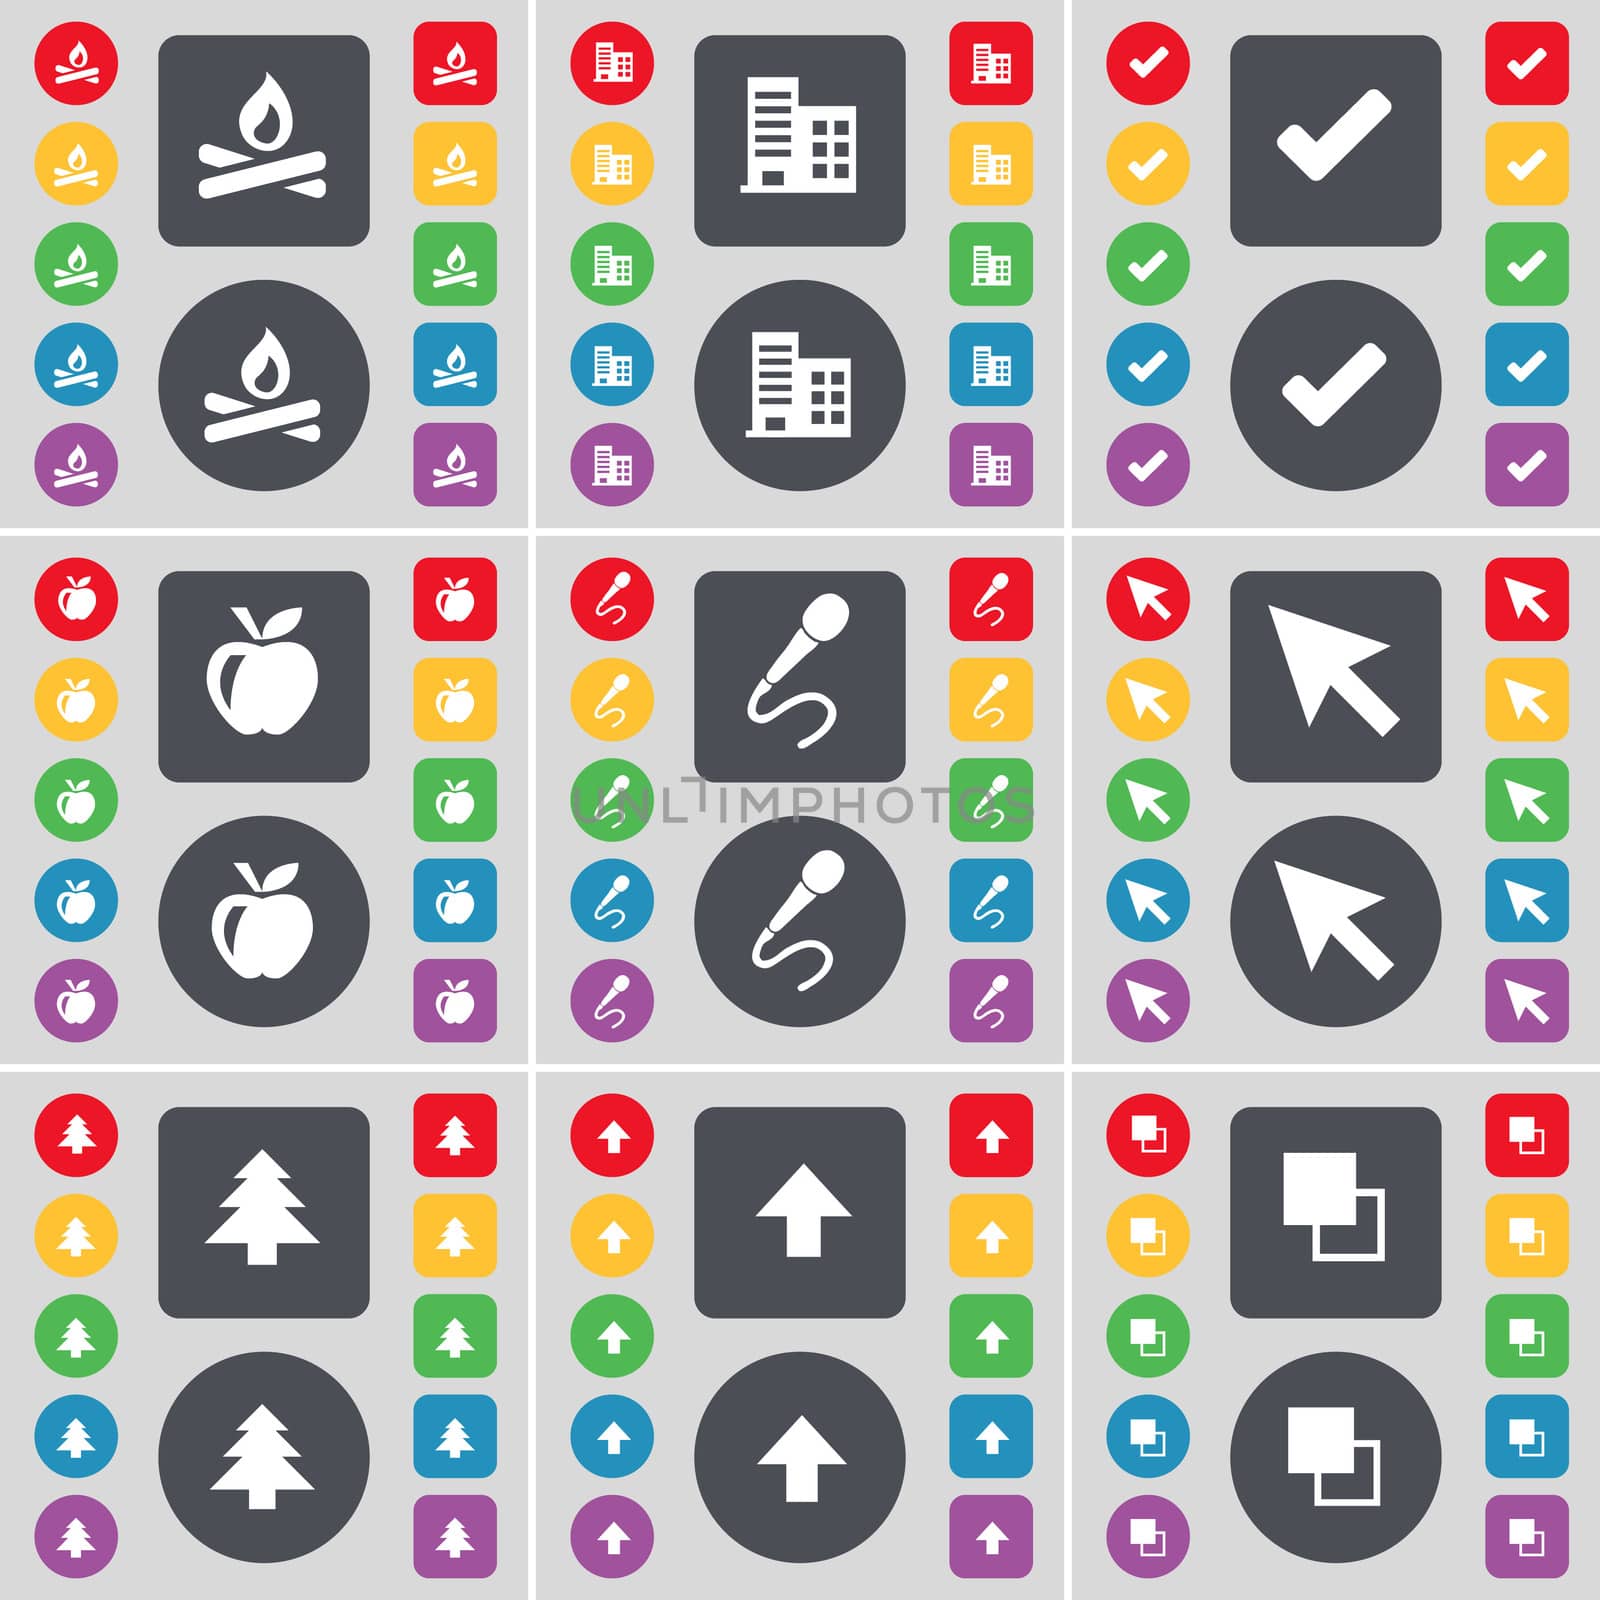 Campfire, Building, Tick, Apple, Microphone, Cursor, Firtree, Arrow up, Copy icon symbol. A large set of flat, colored buttons for your design. illustration